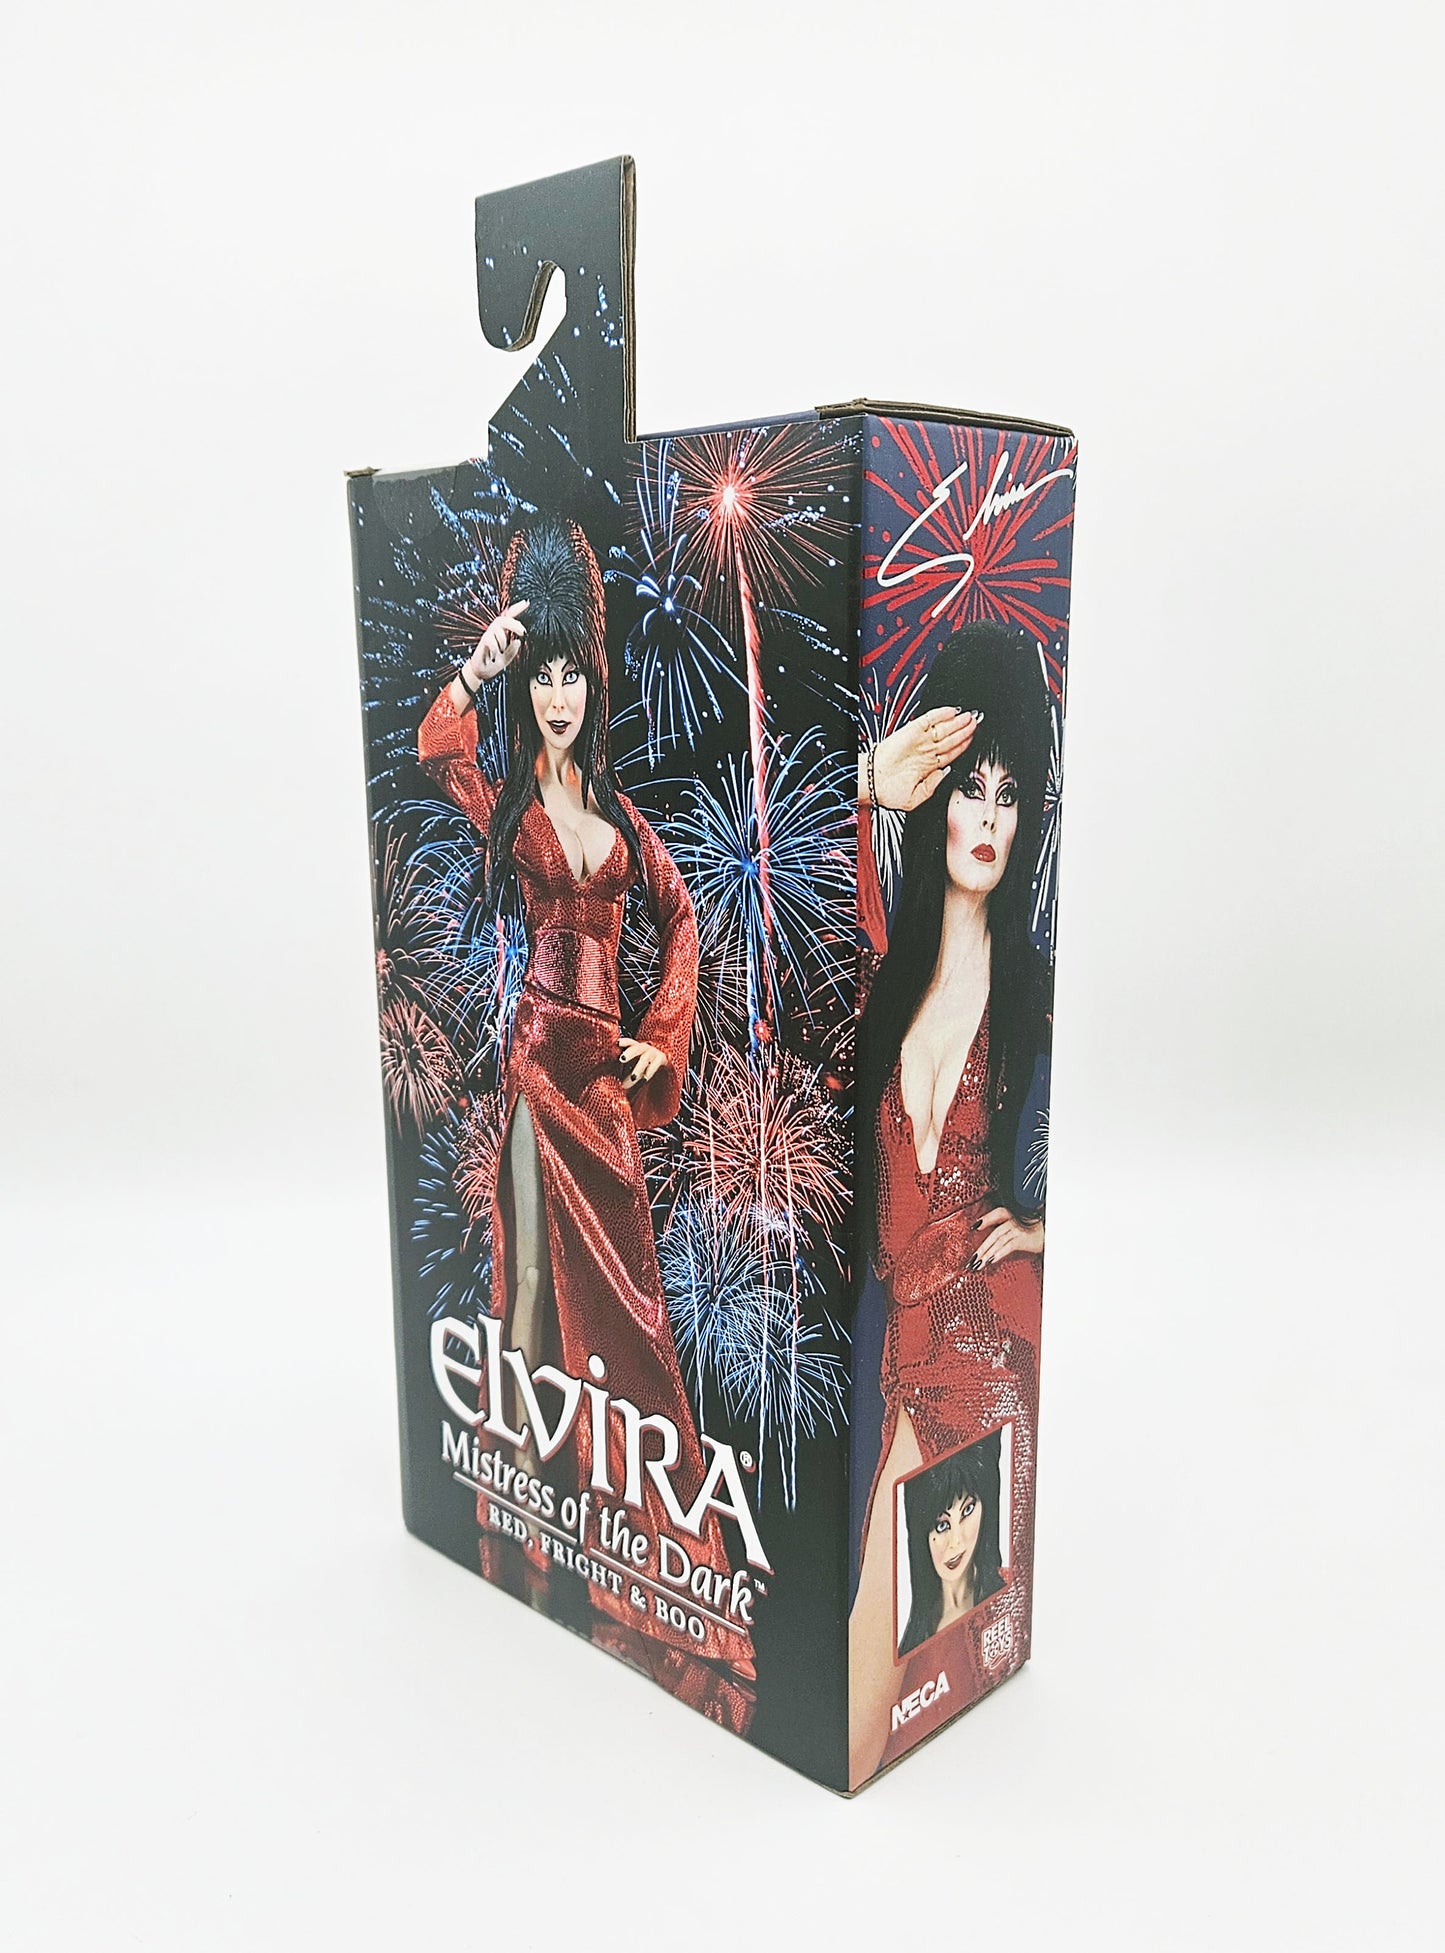 Elvira - Mistress of the Dark (Red, Fright and Boo) Clothed Actionfigur 20cm NECA 2023